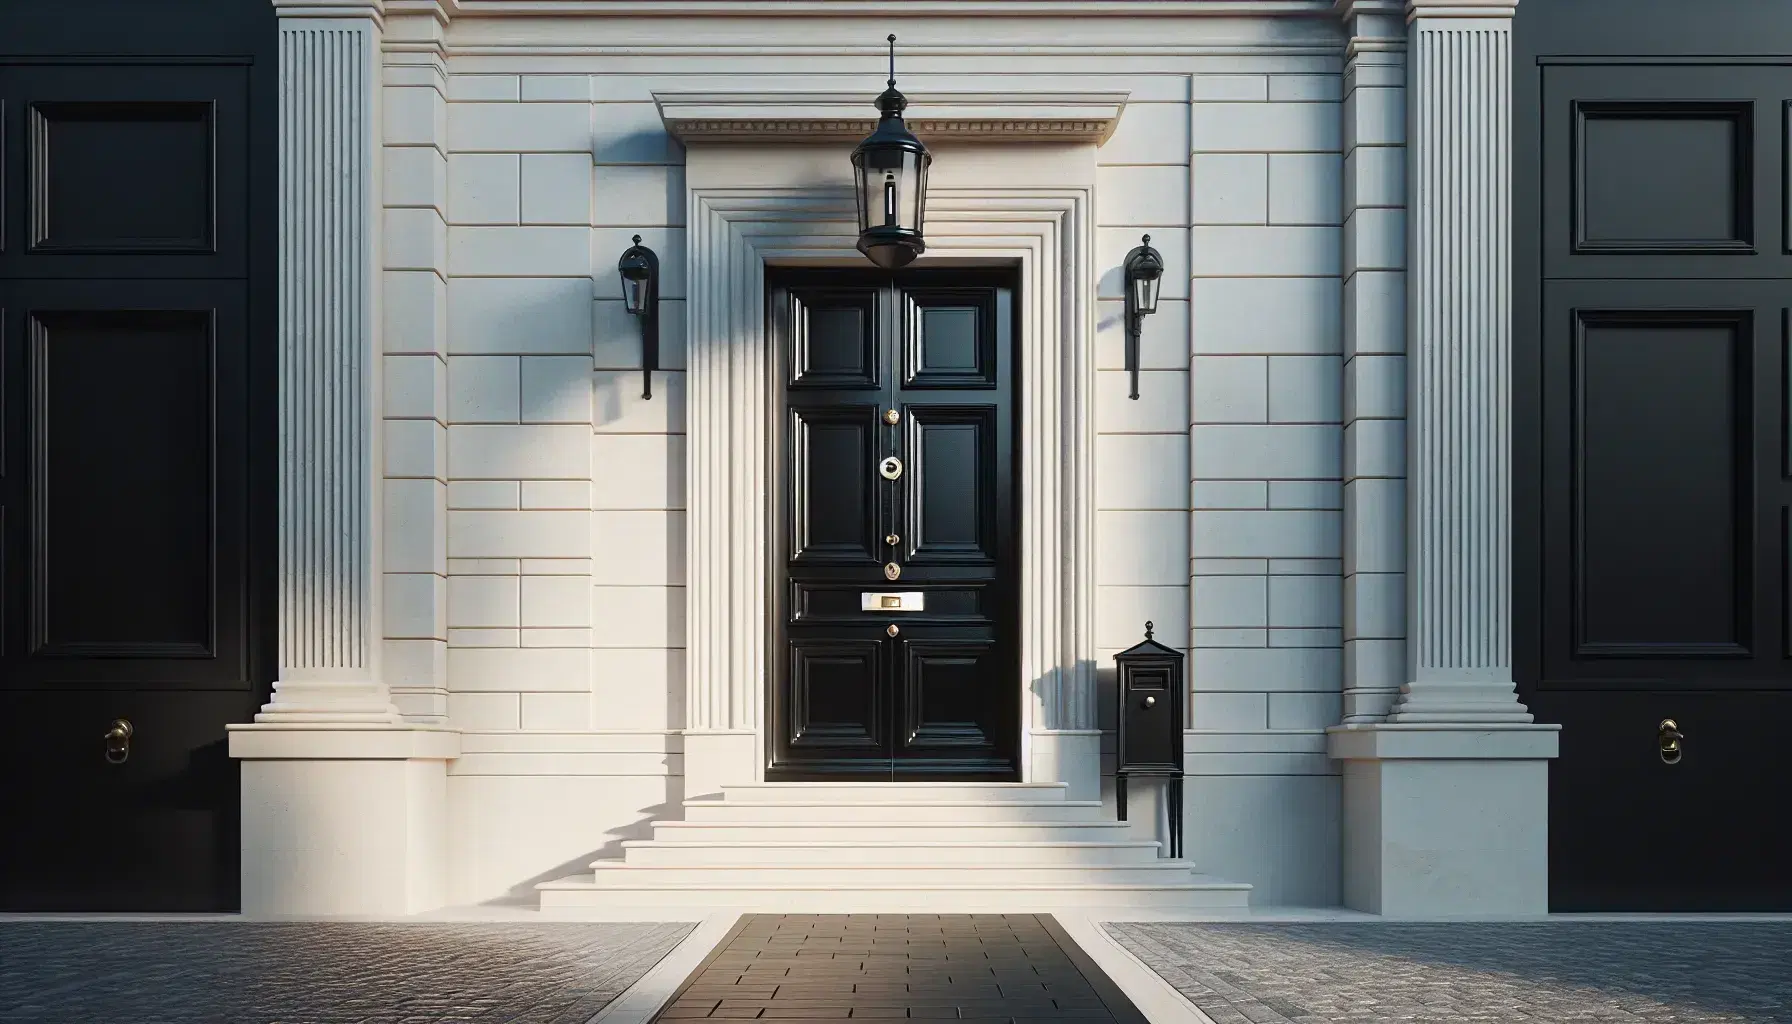 Elegant black door with brass doorknob and letterbox, flanked by Doric columns on a white stone facade, under a lantern-style light.